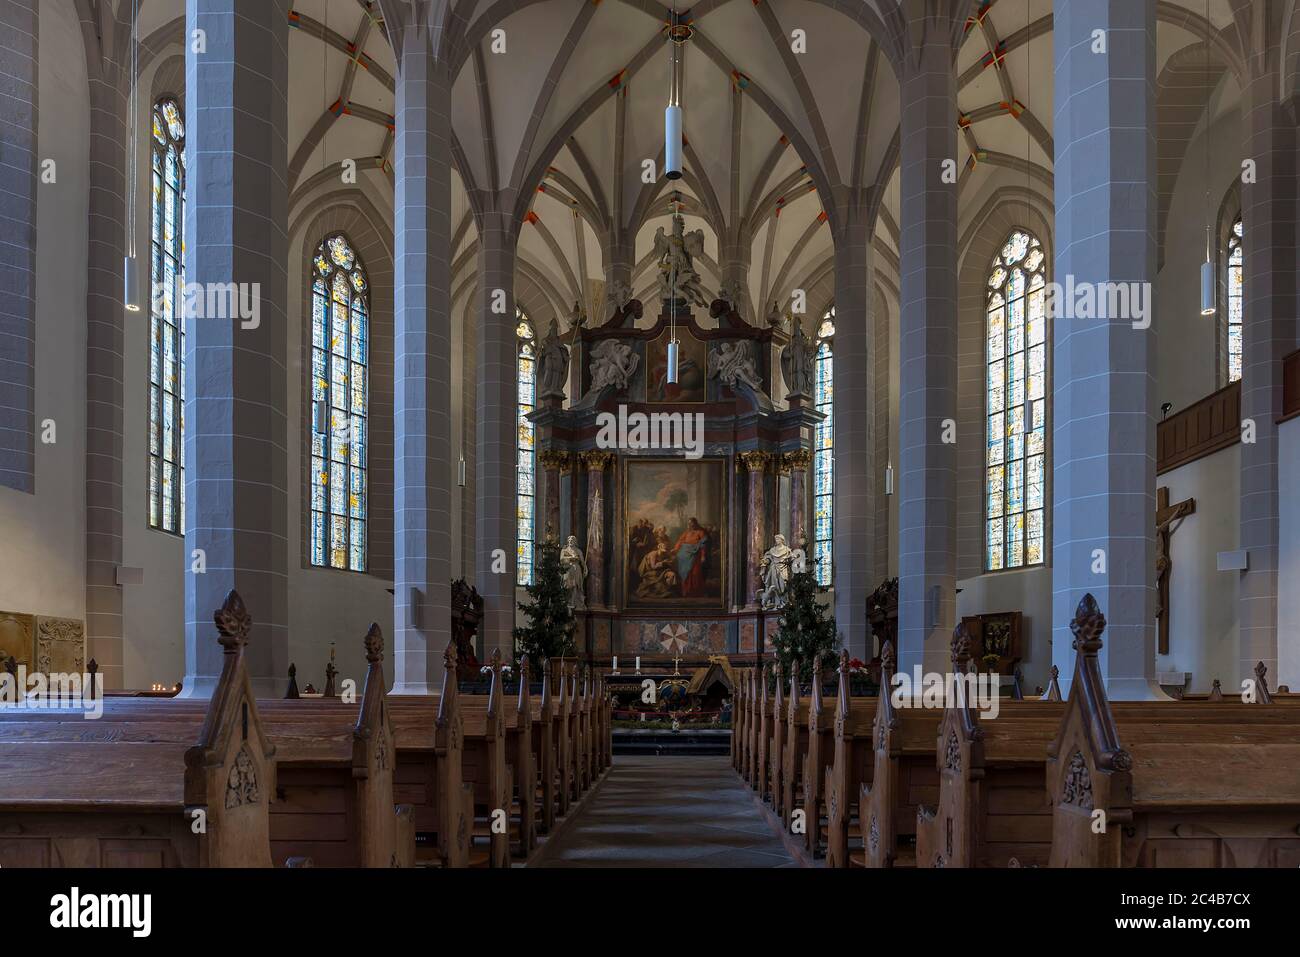 High altar in the catholic part of the simultaneous church in the gothic cathedral St. Petri, Bautzen, Upper Lusatia, Saxony, Germany Stock Photo